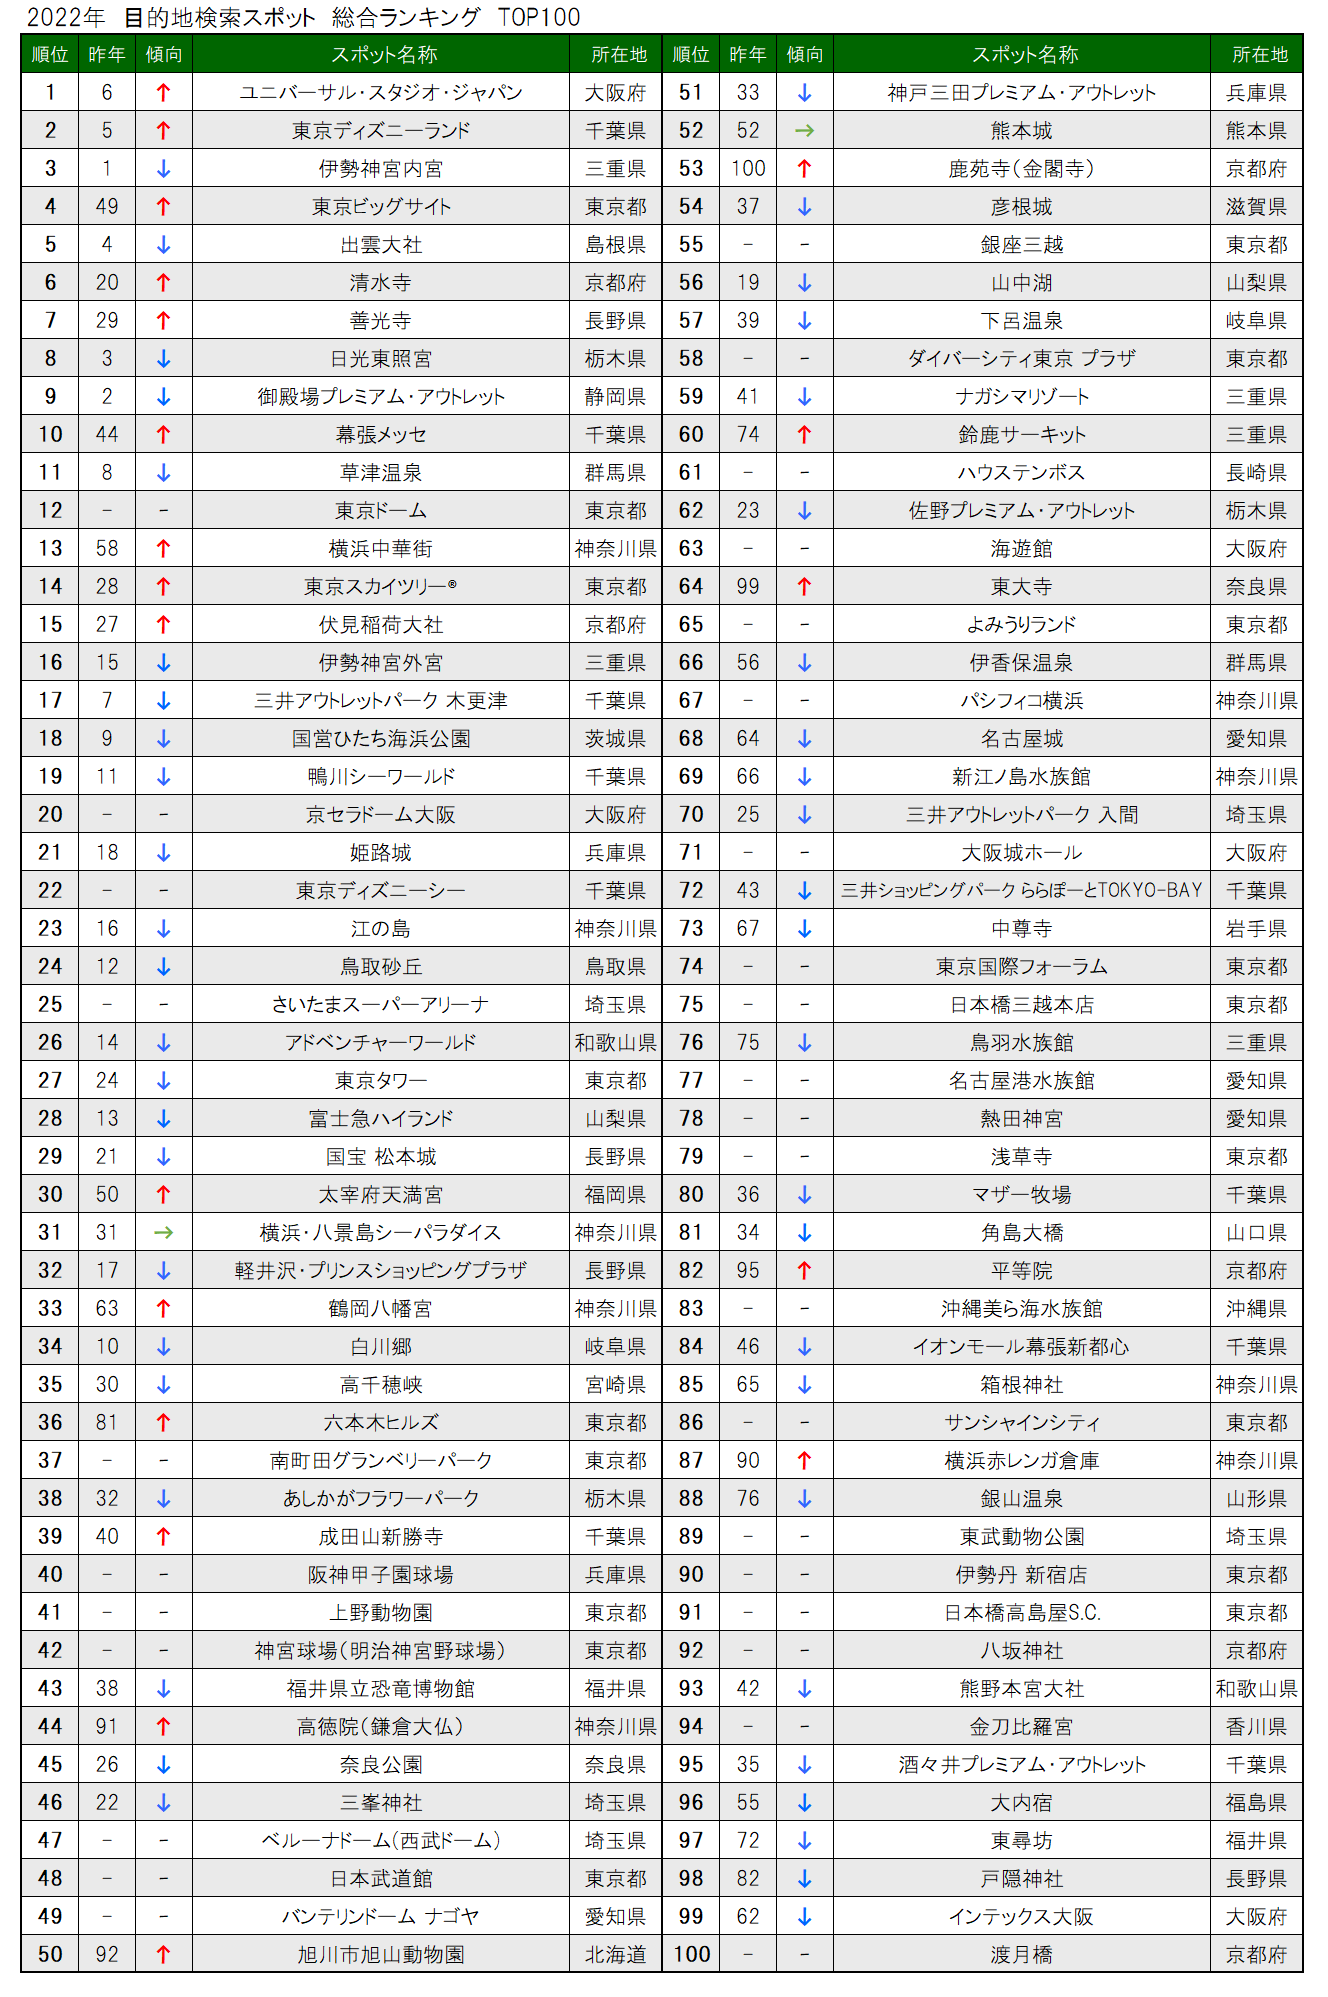 【Final】2022_総合ランキング_TOP100.png